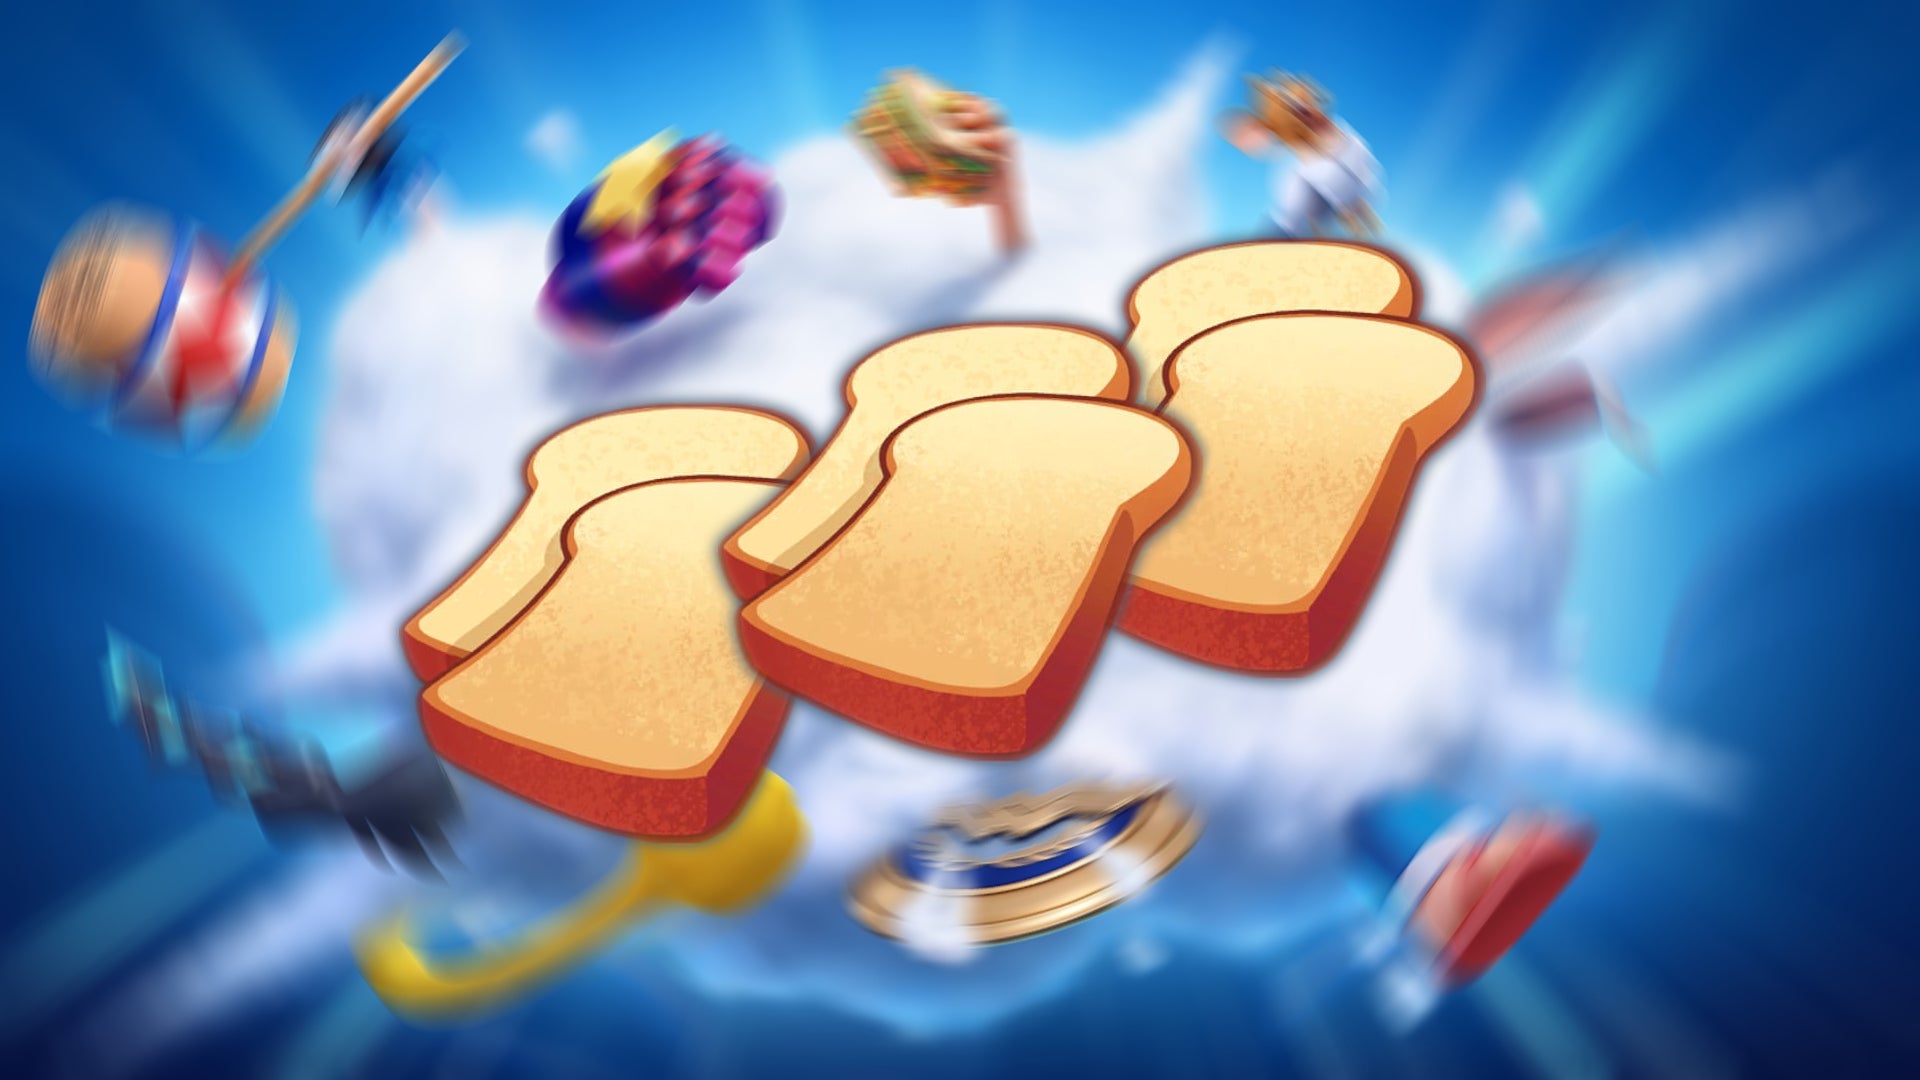 The toast from MultiVersus is shown.